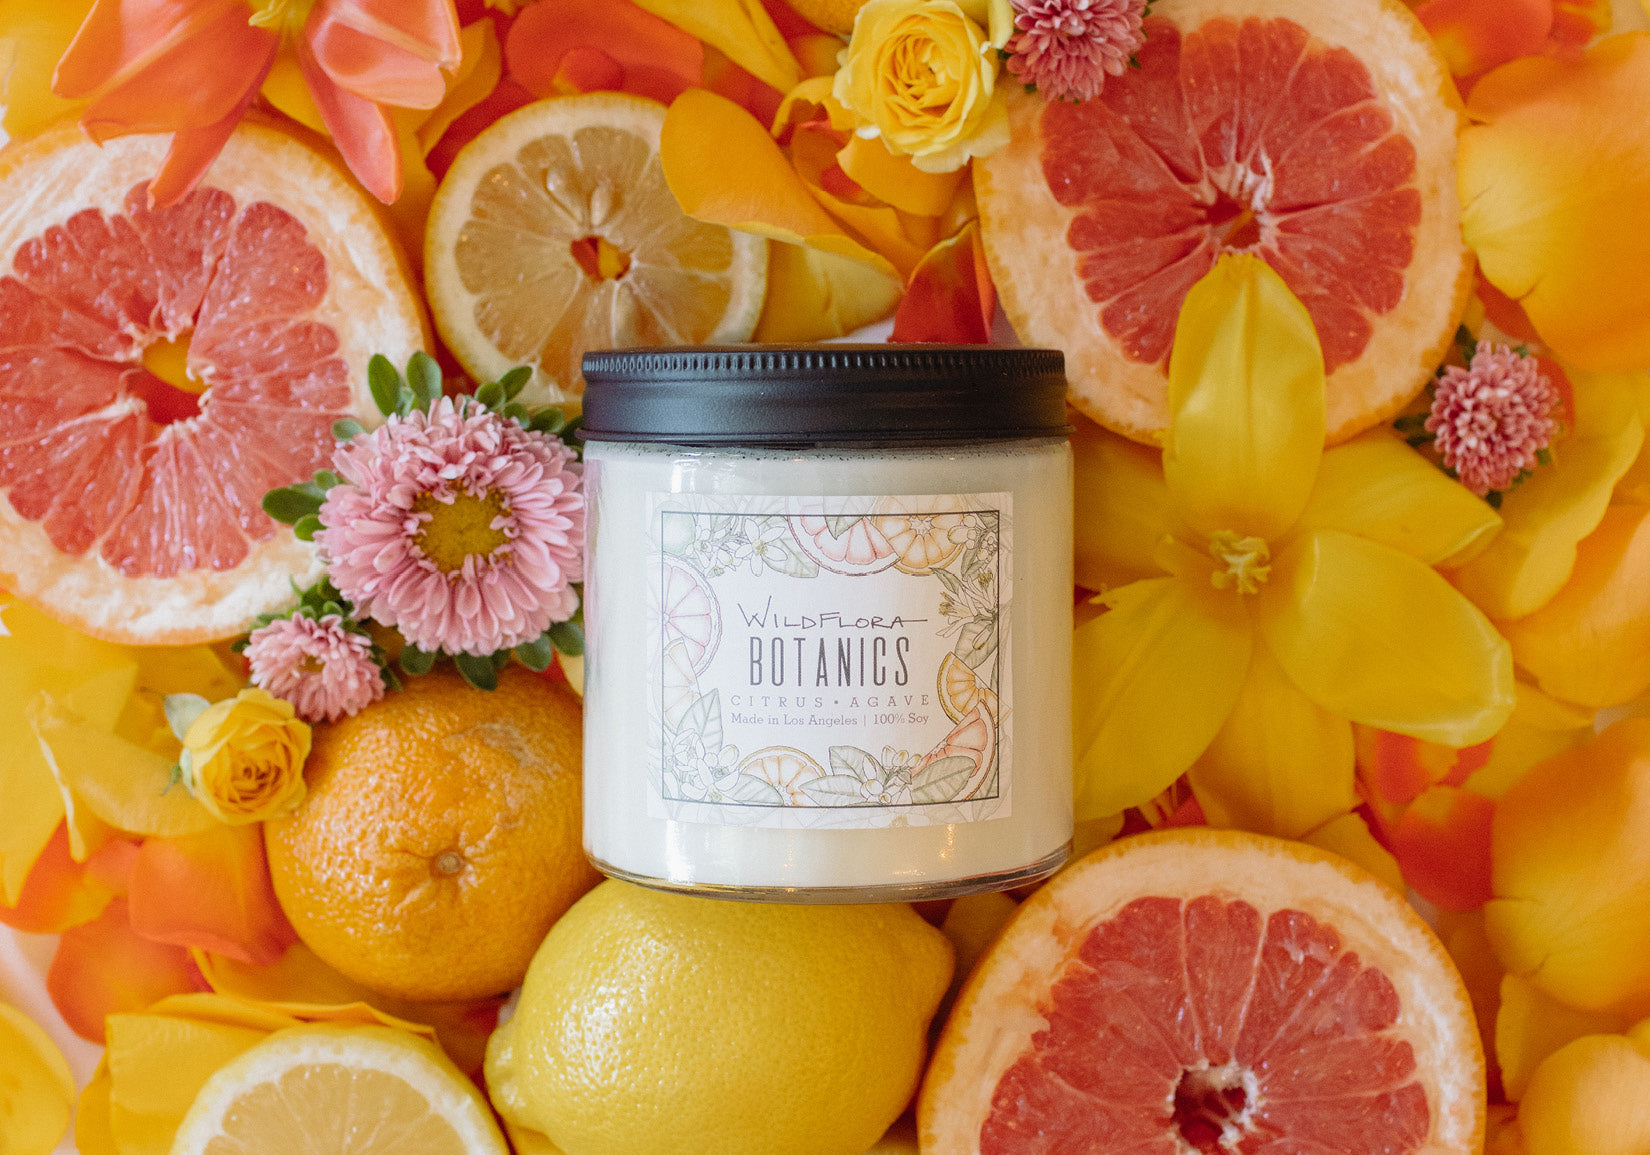 Introducing a NEW SCENT to the WildFlora Double Wick Botanical Candle